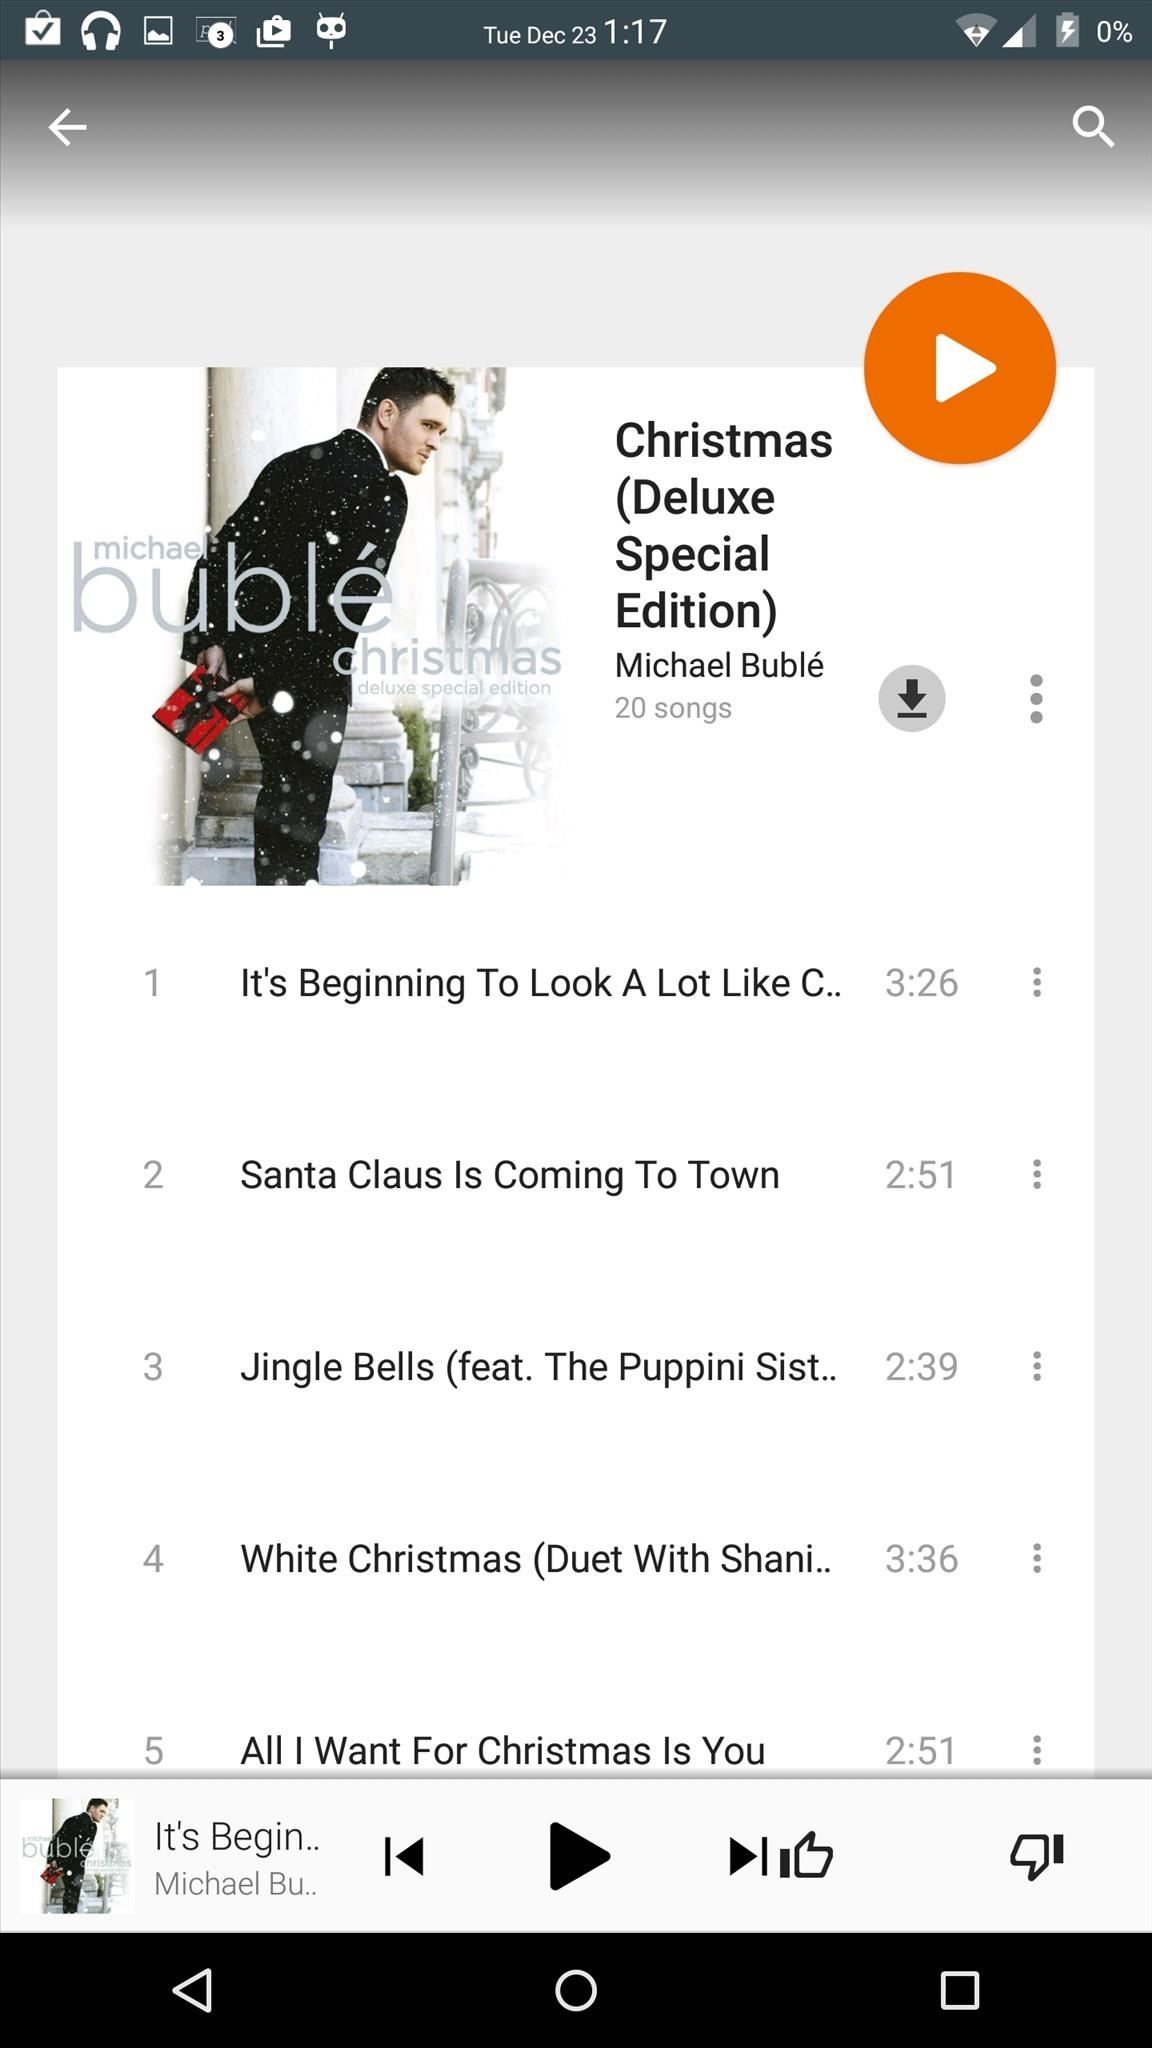 Holiday Freebie: Michael Bublé's Christmas Deluxe Special Edition Album